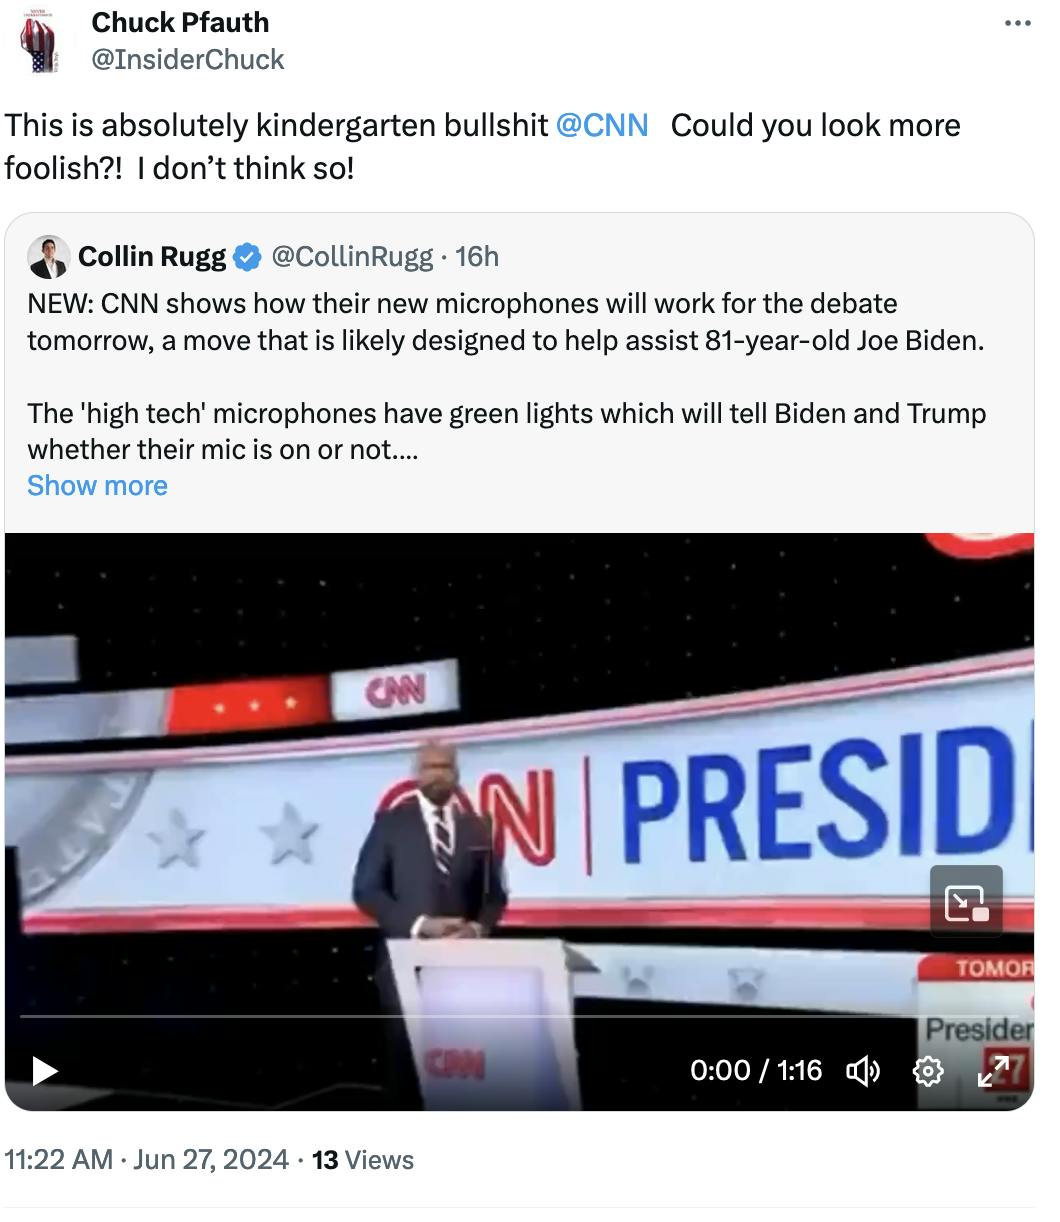 Twitter Screenshot Chuck Pfauth @InsiderChuck: This is absolutely kindergarten bullshit @CNN Could you look more foolish?! I don’t think so!